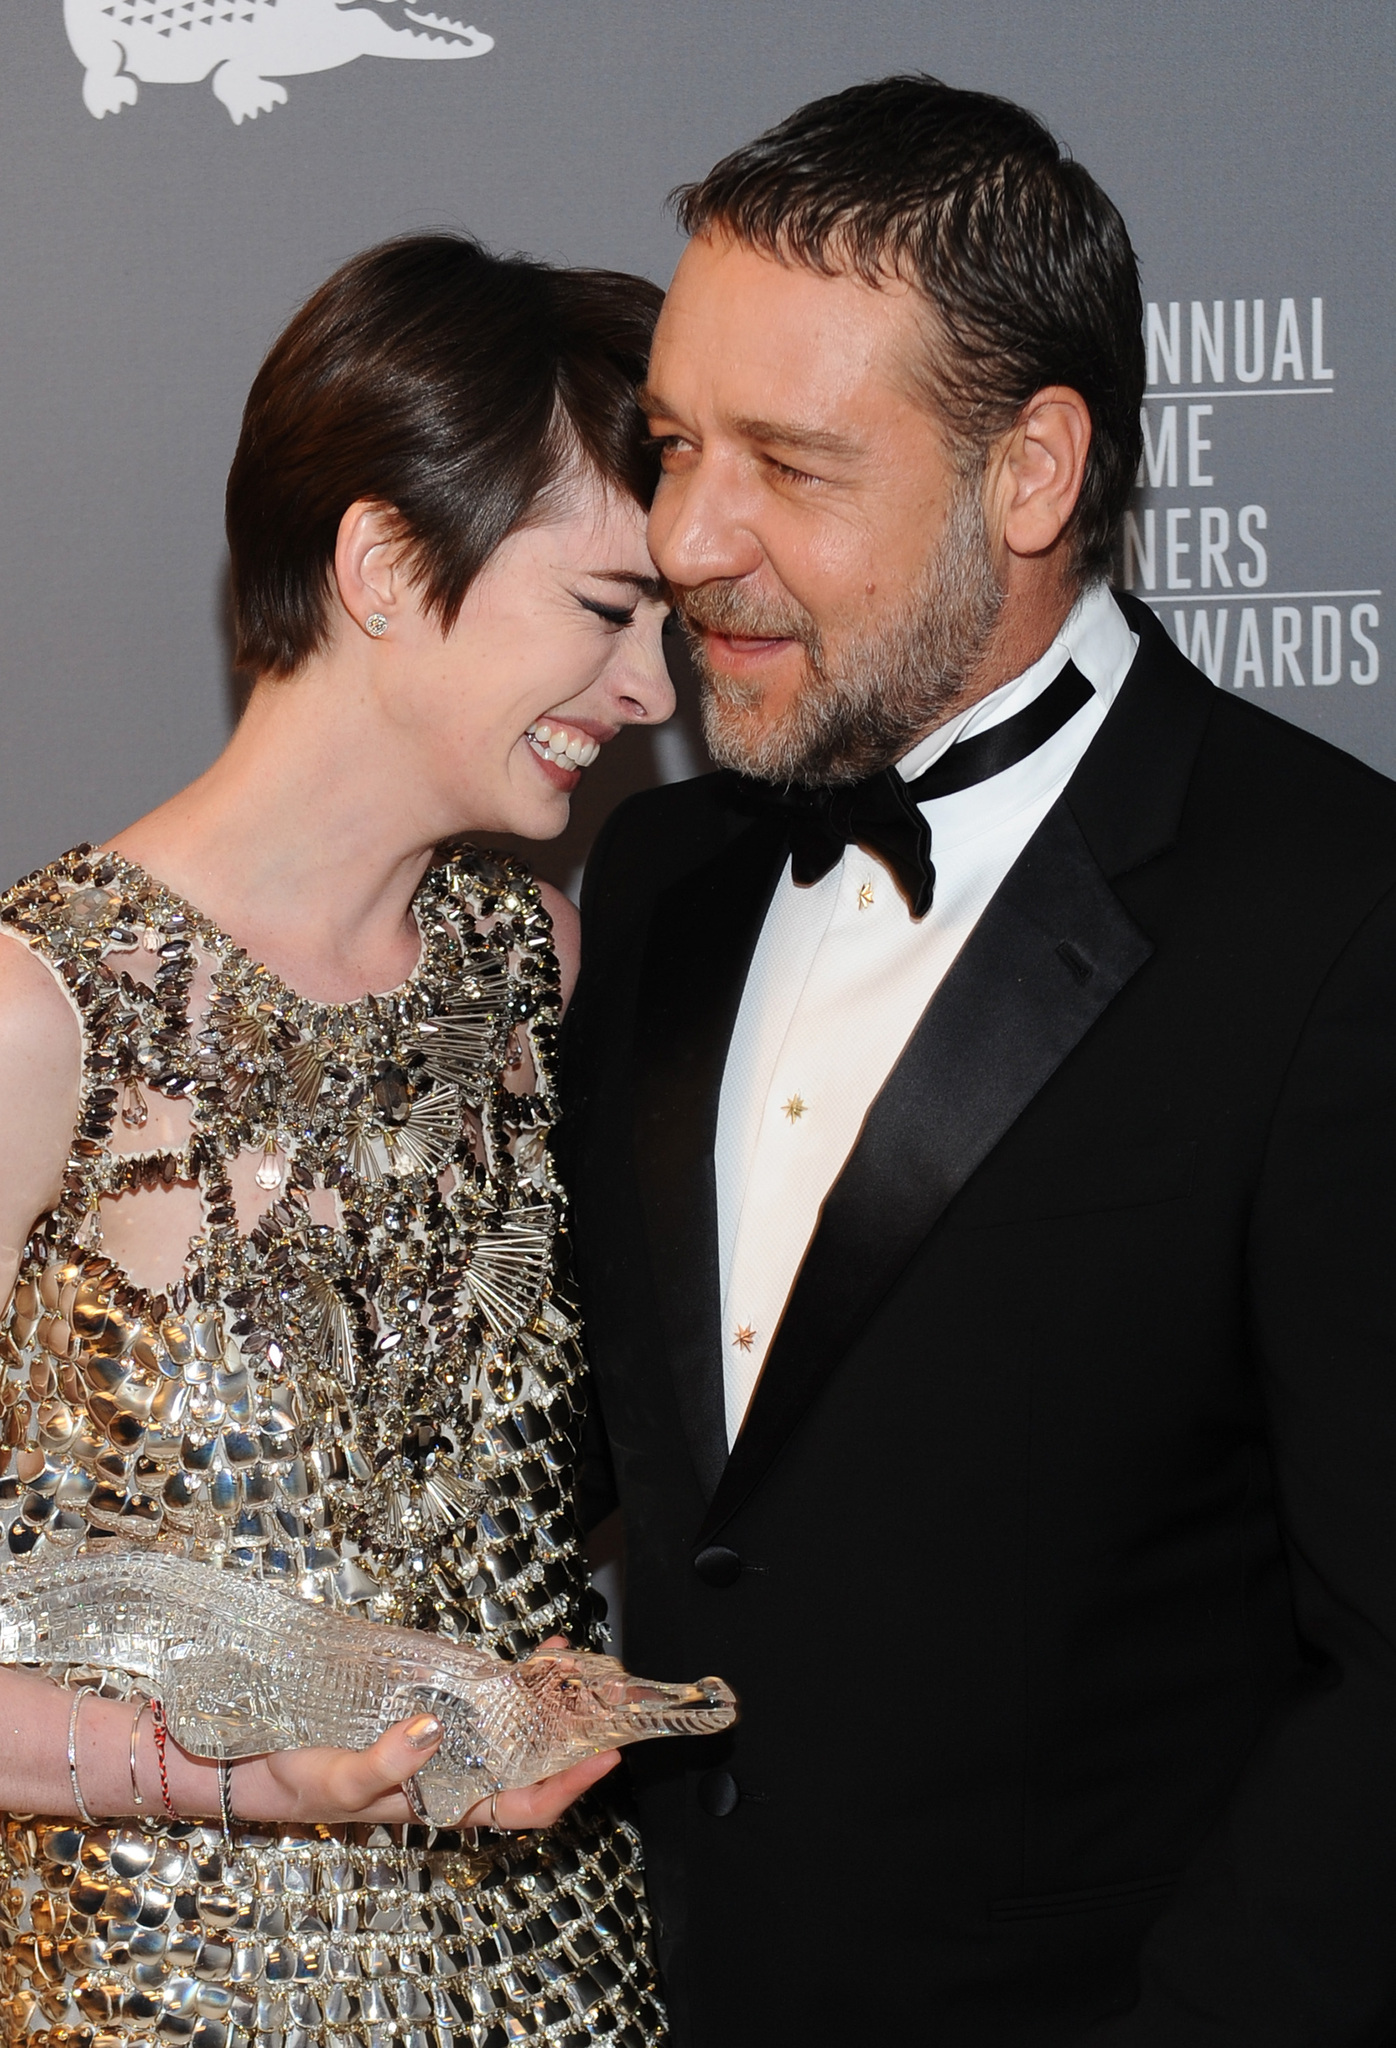 Russell Crowe and Anne Hathaway